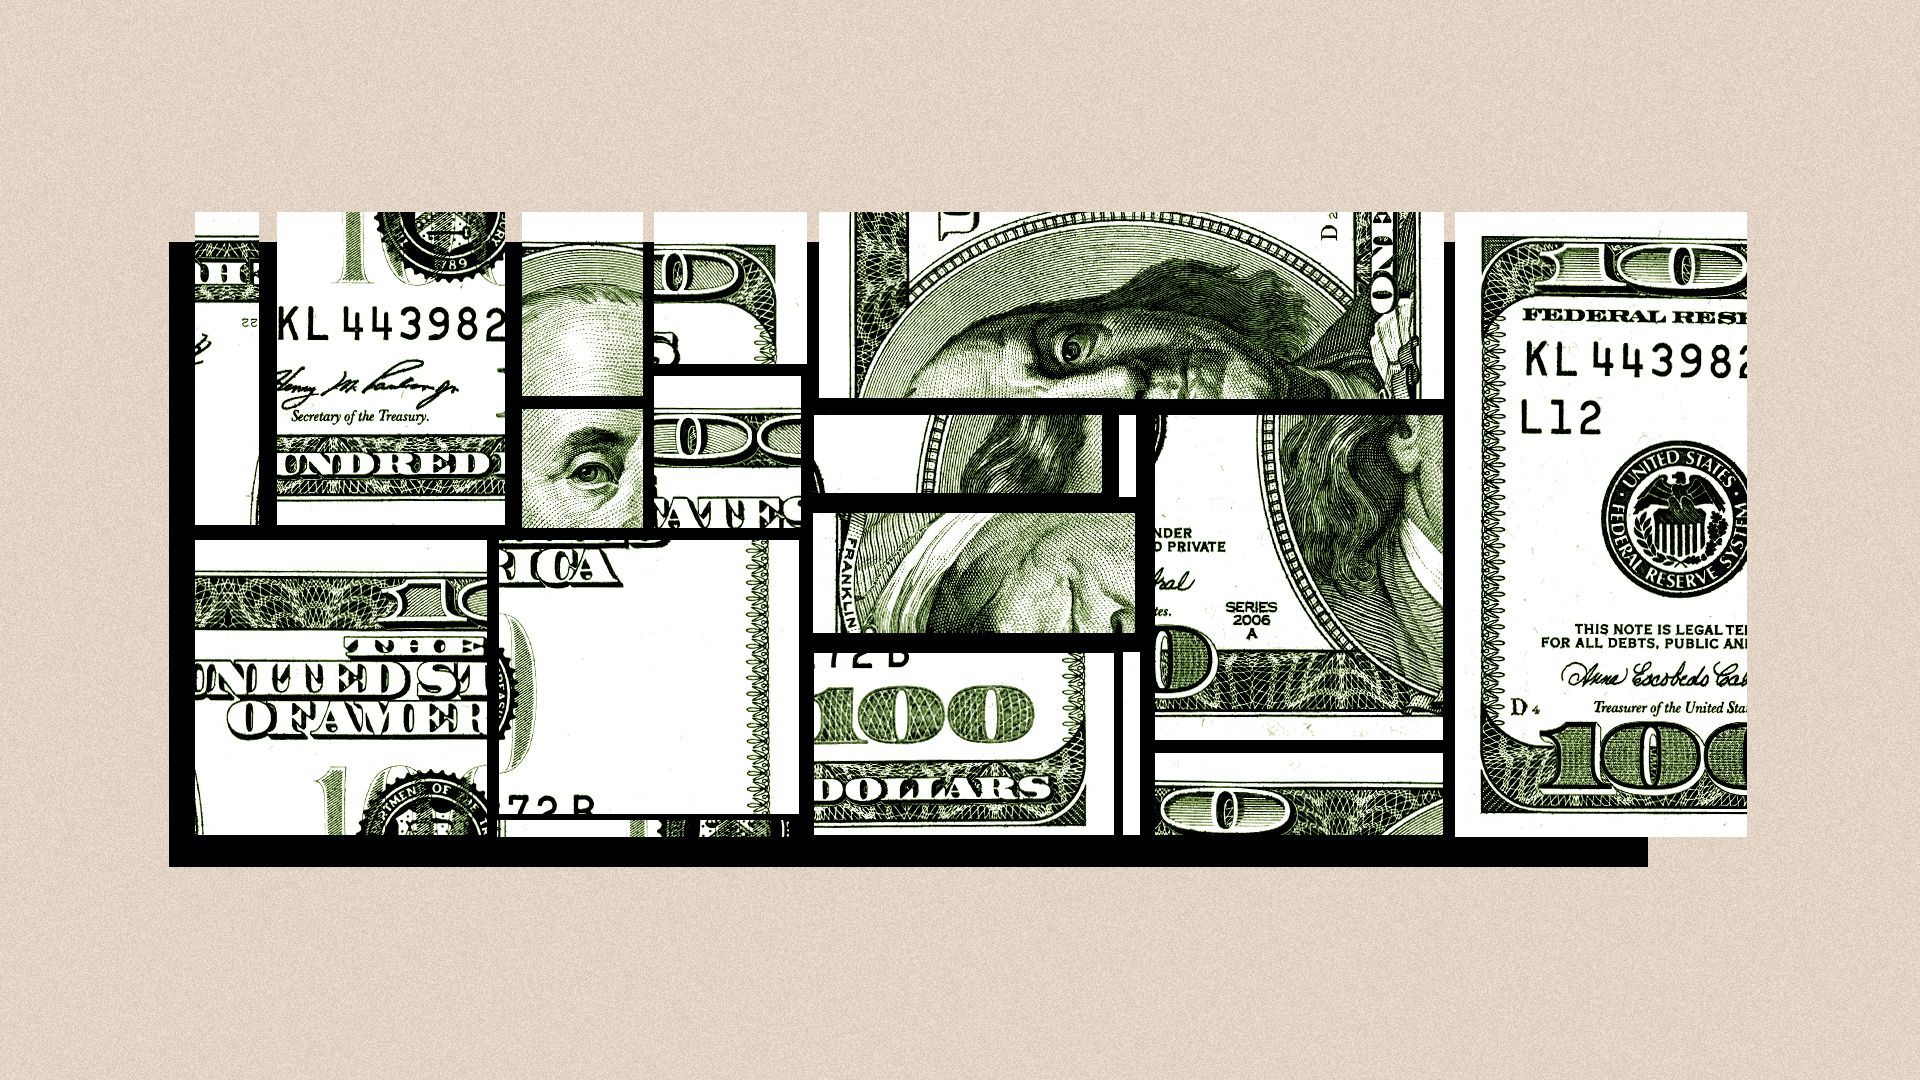 Illustration of a hundred dollar bill cut up and rearranged. 